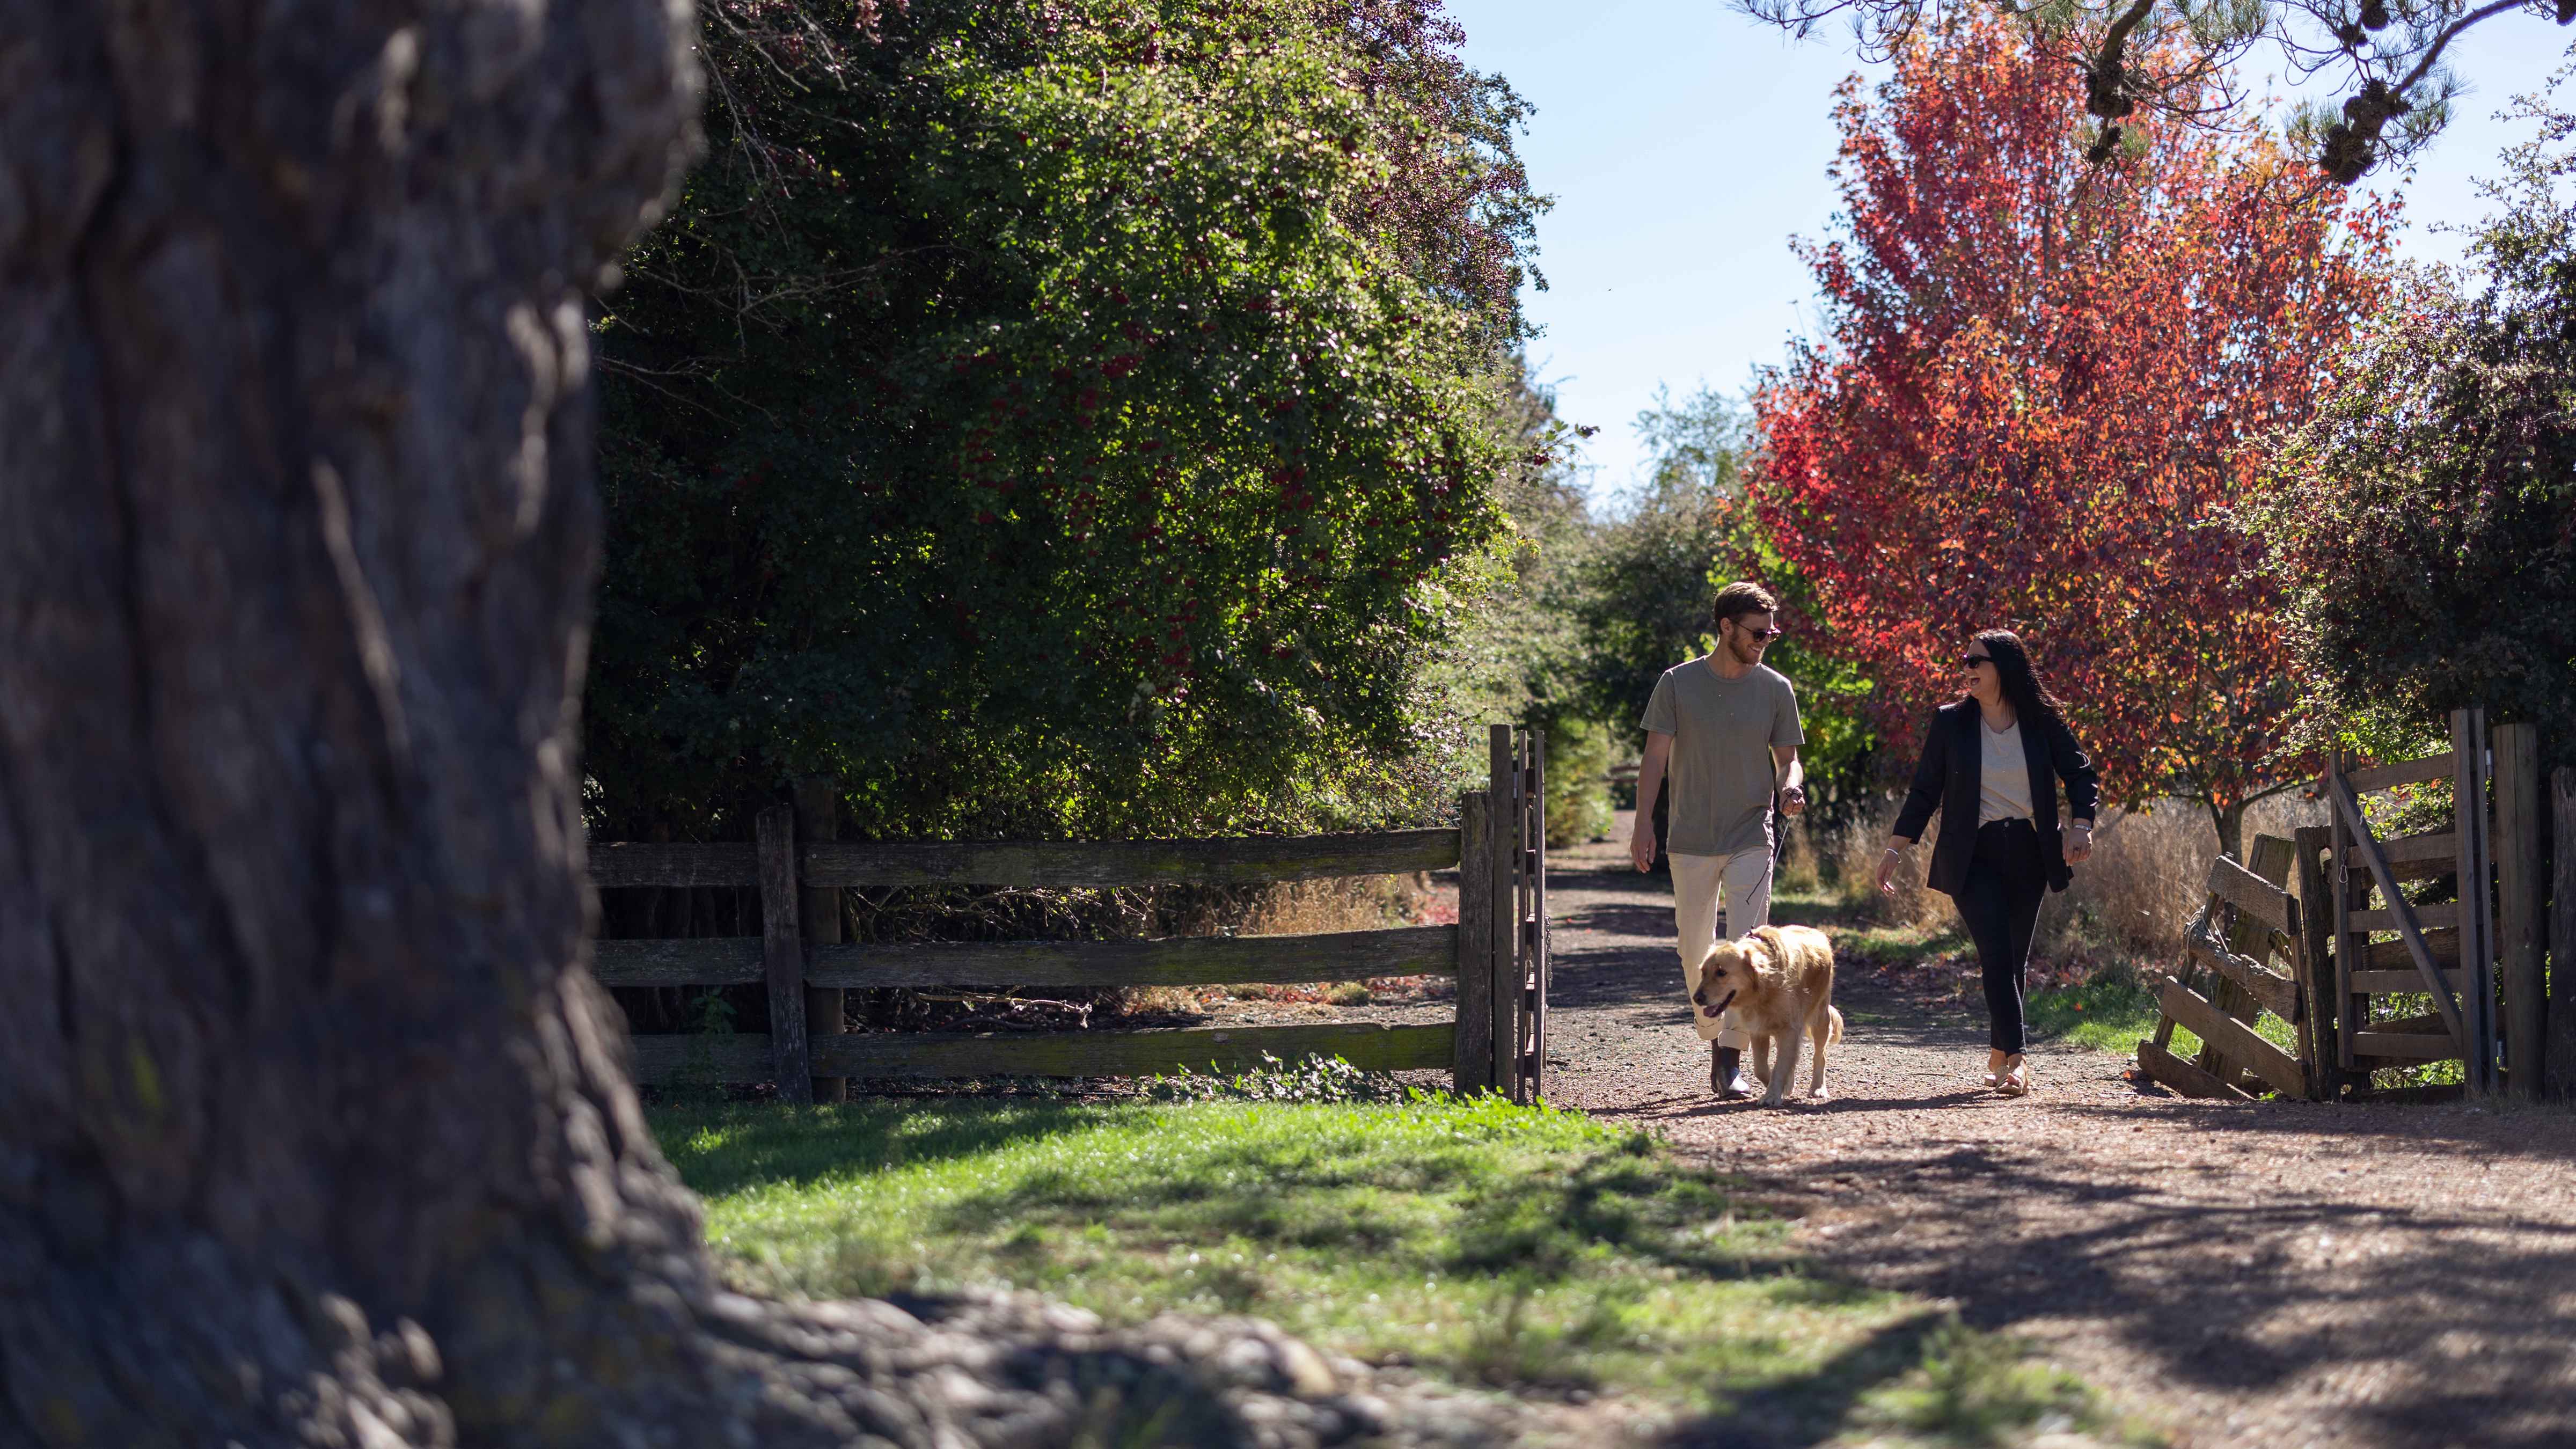 A couple and a dog walk through a wooden gate way with a post and railing fence alongside. There is a Maple tree in the background that has bright red and orange leaves. The trunk of an old pine tree is in the foreground. Photo: Kate von Stieglitz / Tourism Australia.